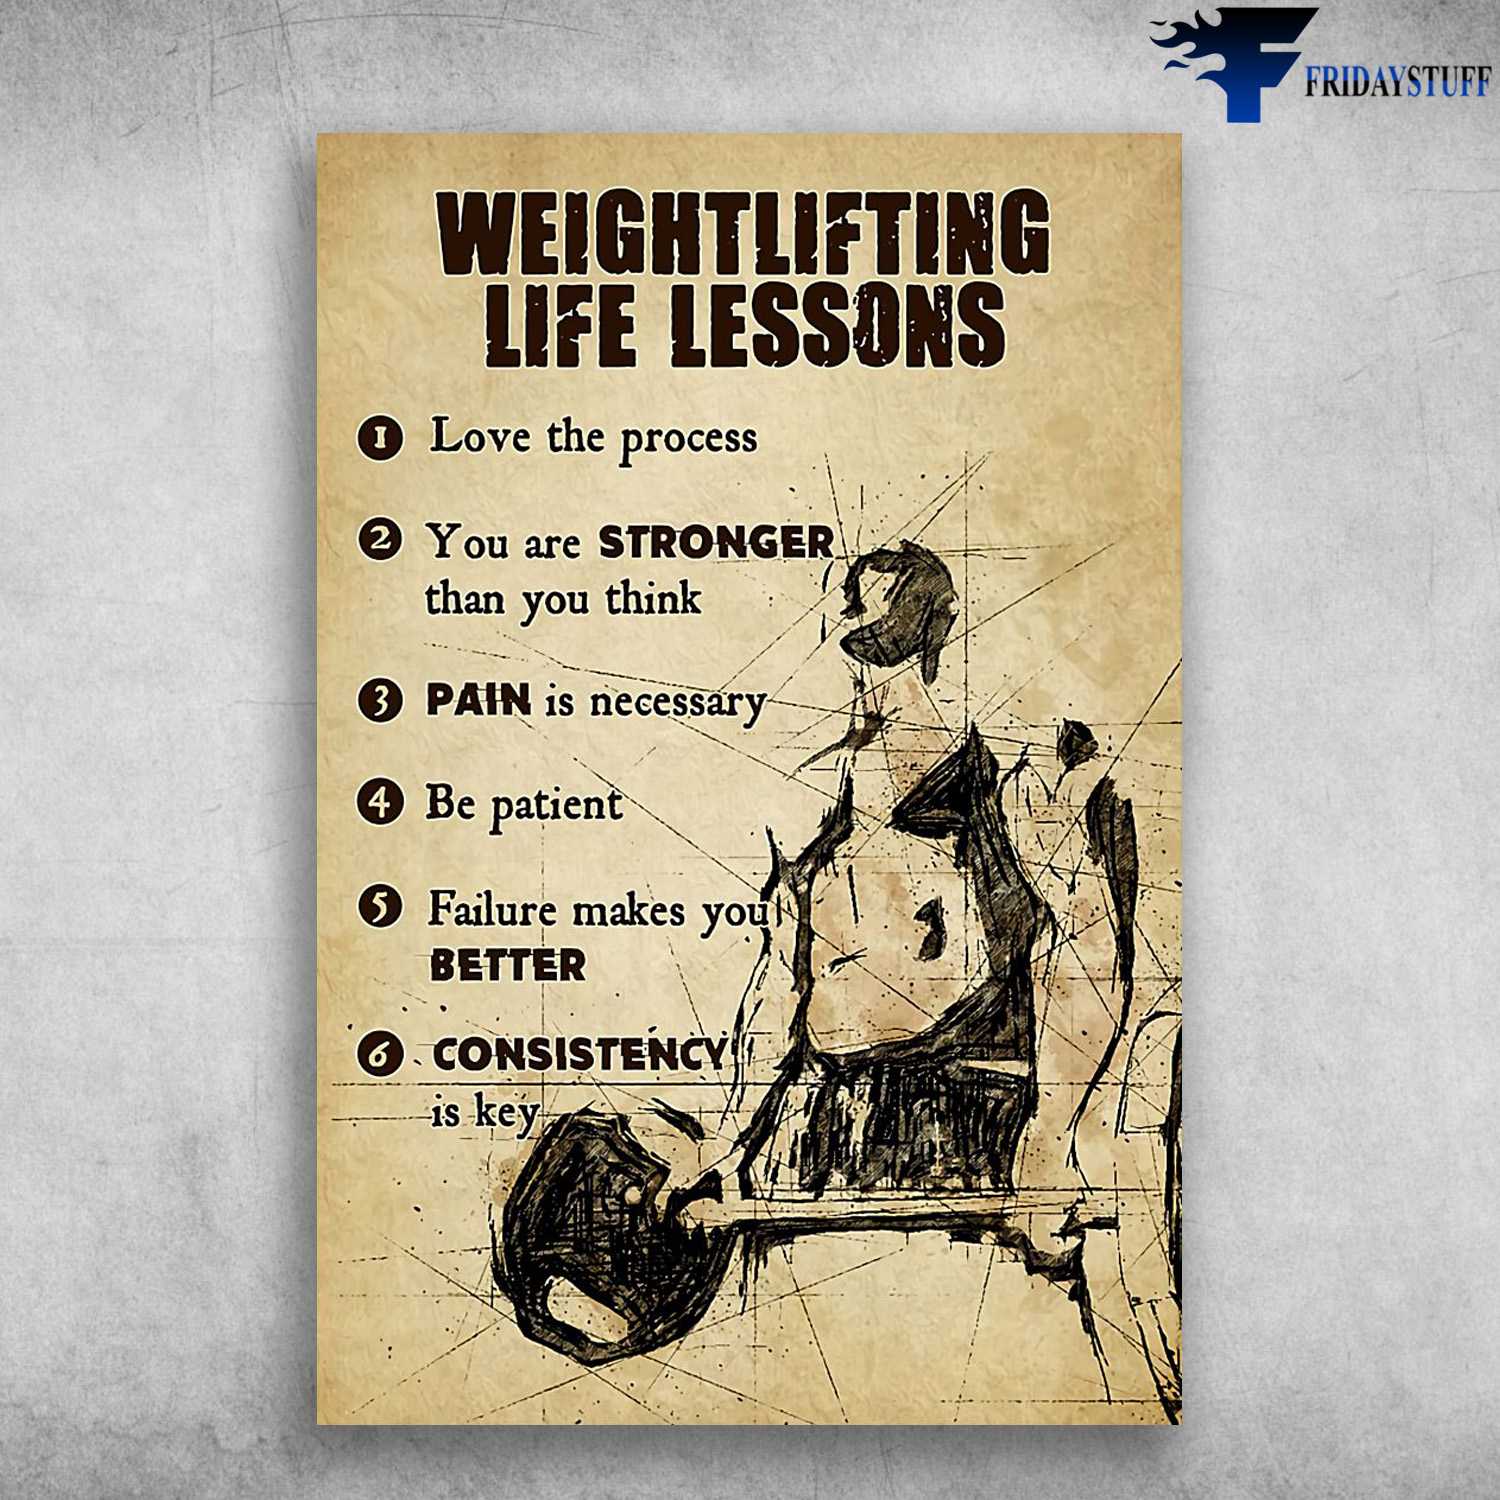 Gym Room, Gym Poster, Weightlifting Life Lessons, Love The Proses, You Are Stronger Than You Think, Pain Is Necessary, Be Patient